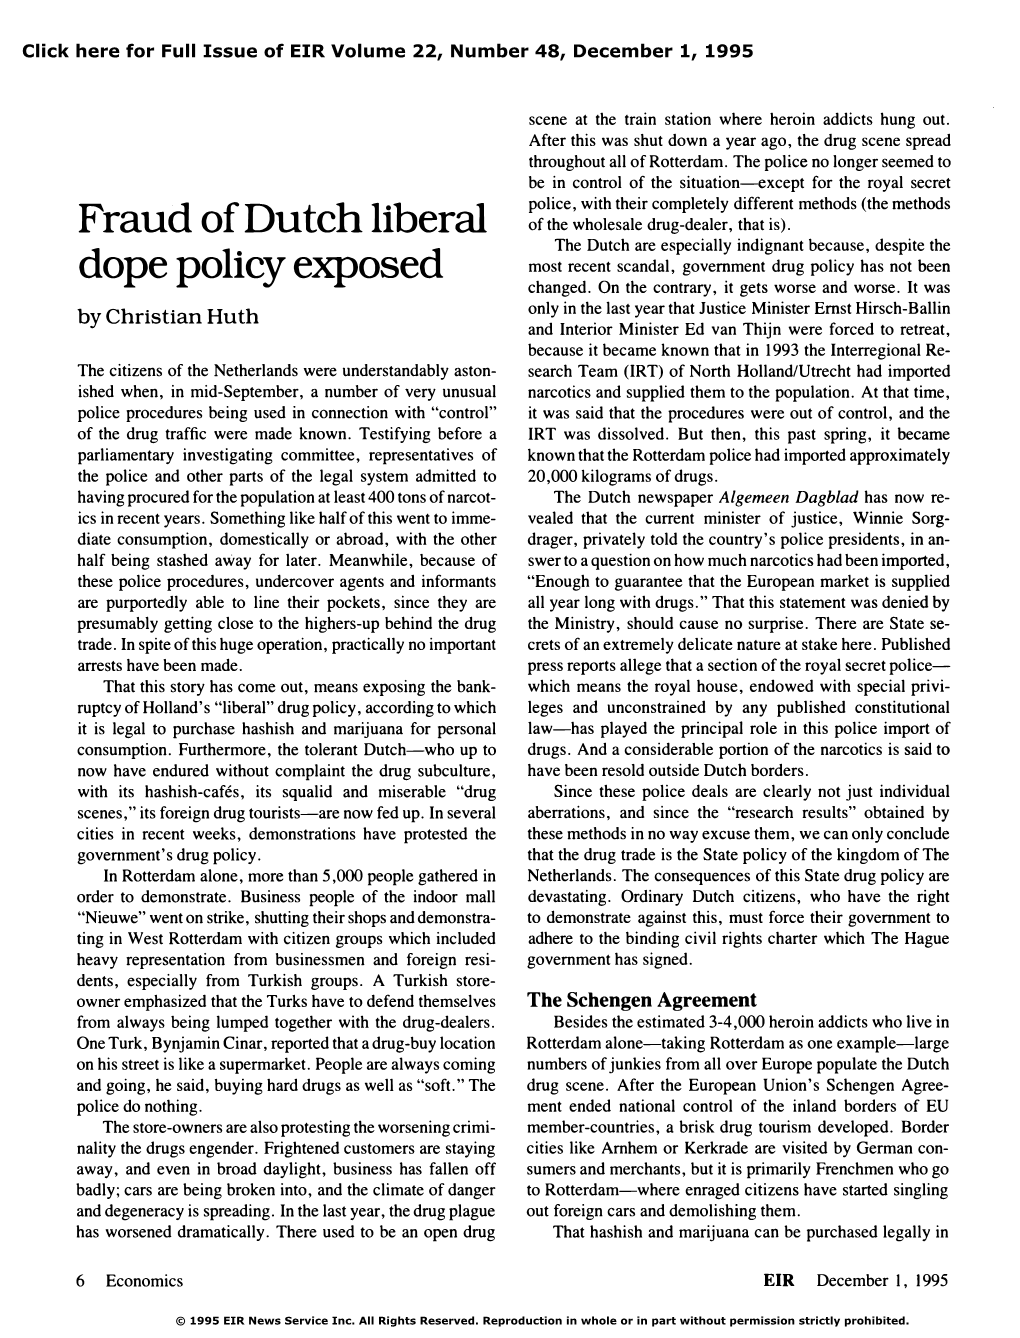 Fraud of Dutch Liberal Dope Policy Exposed